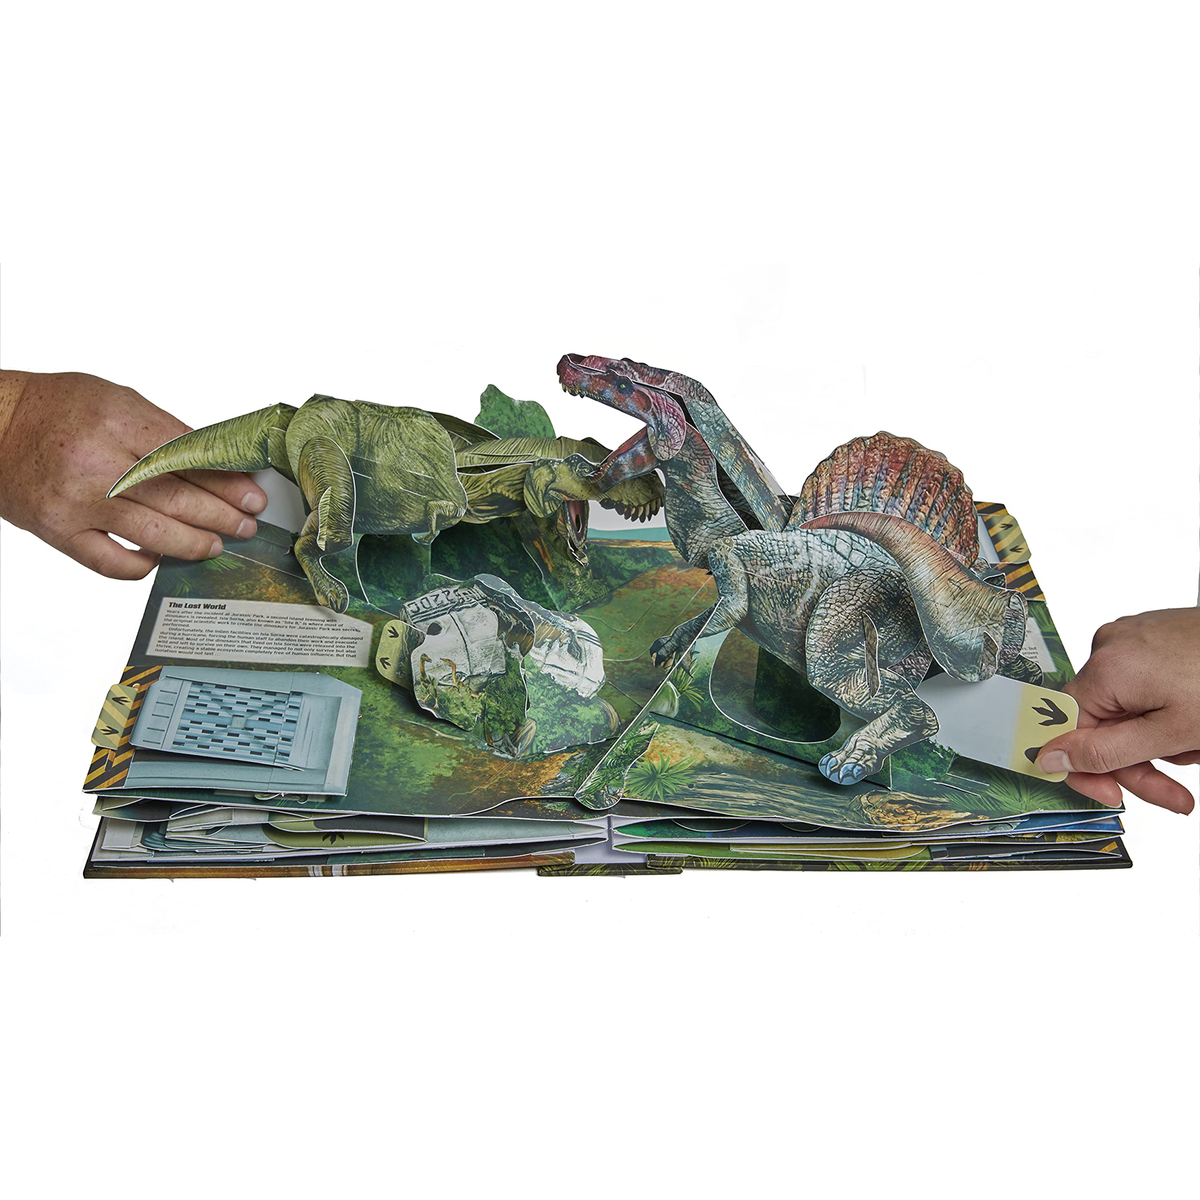 Jurassic World - The Ultimate Pop-Up Book